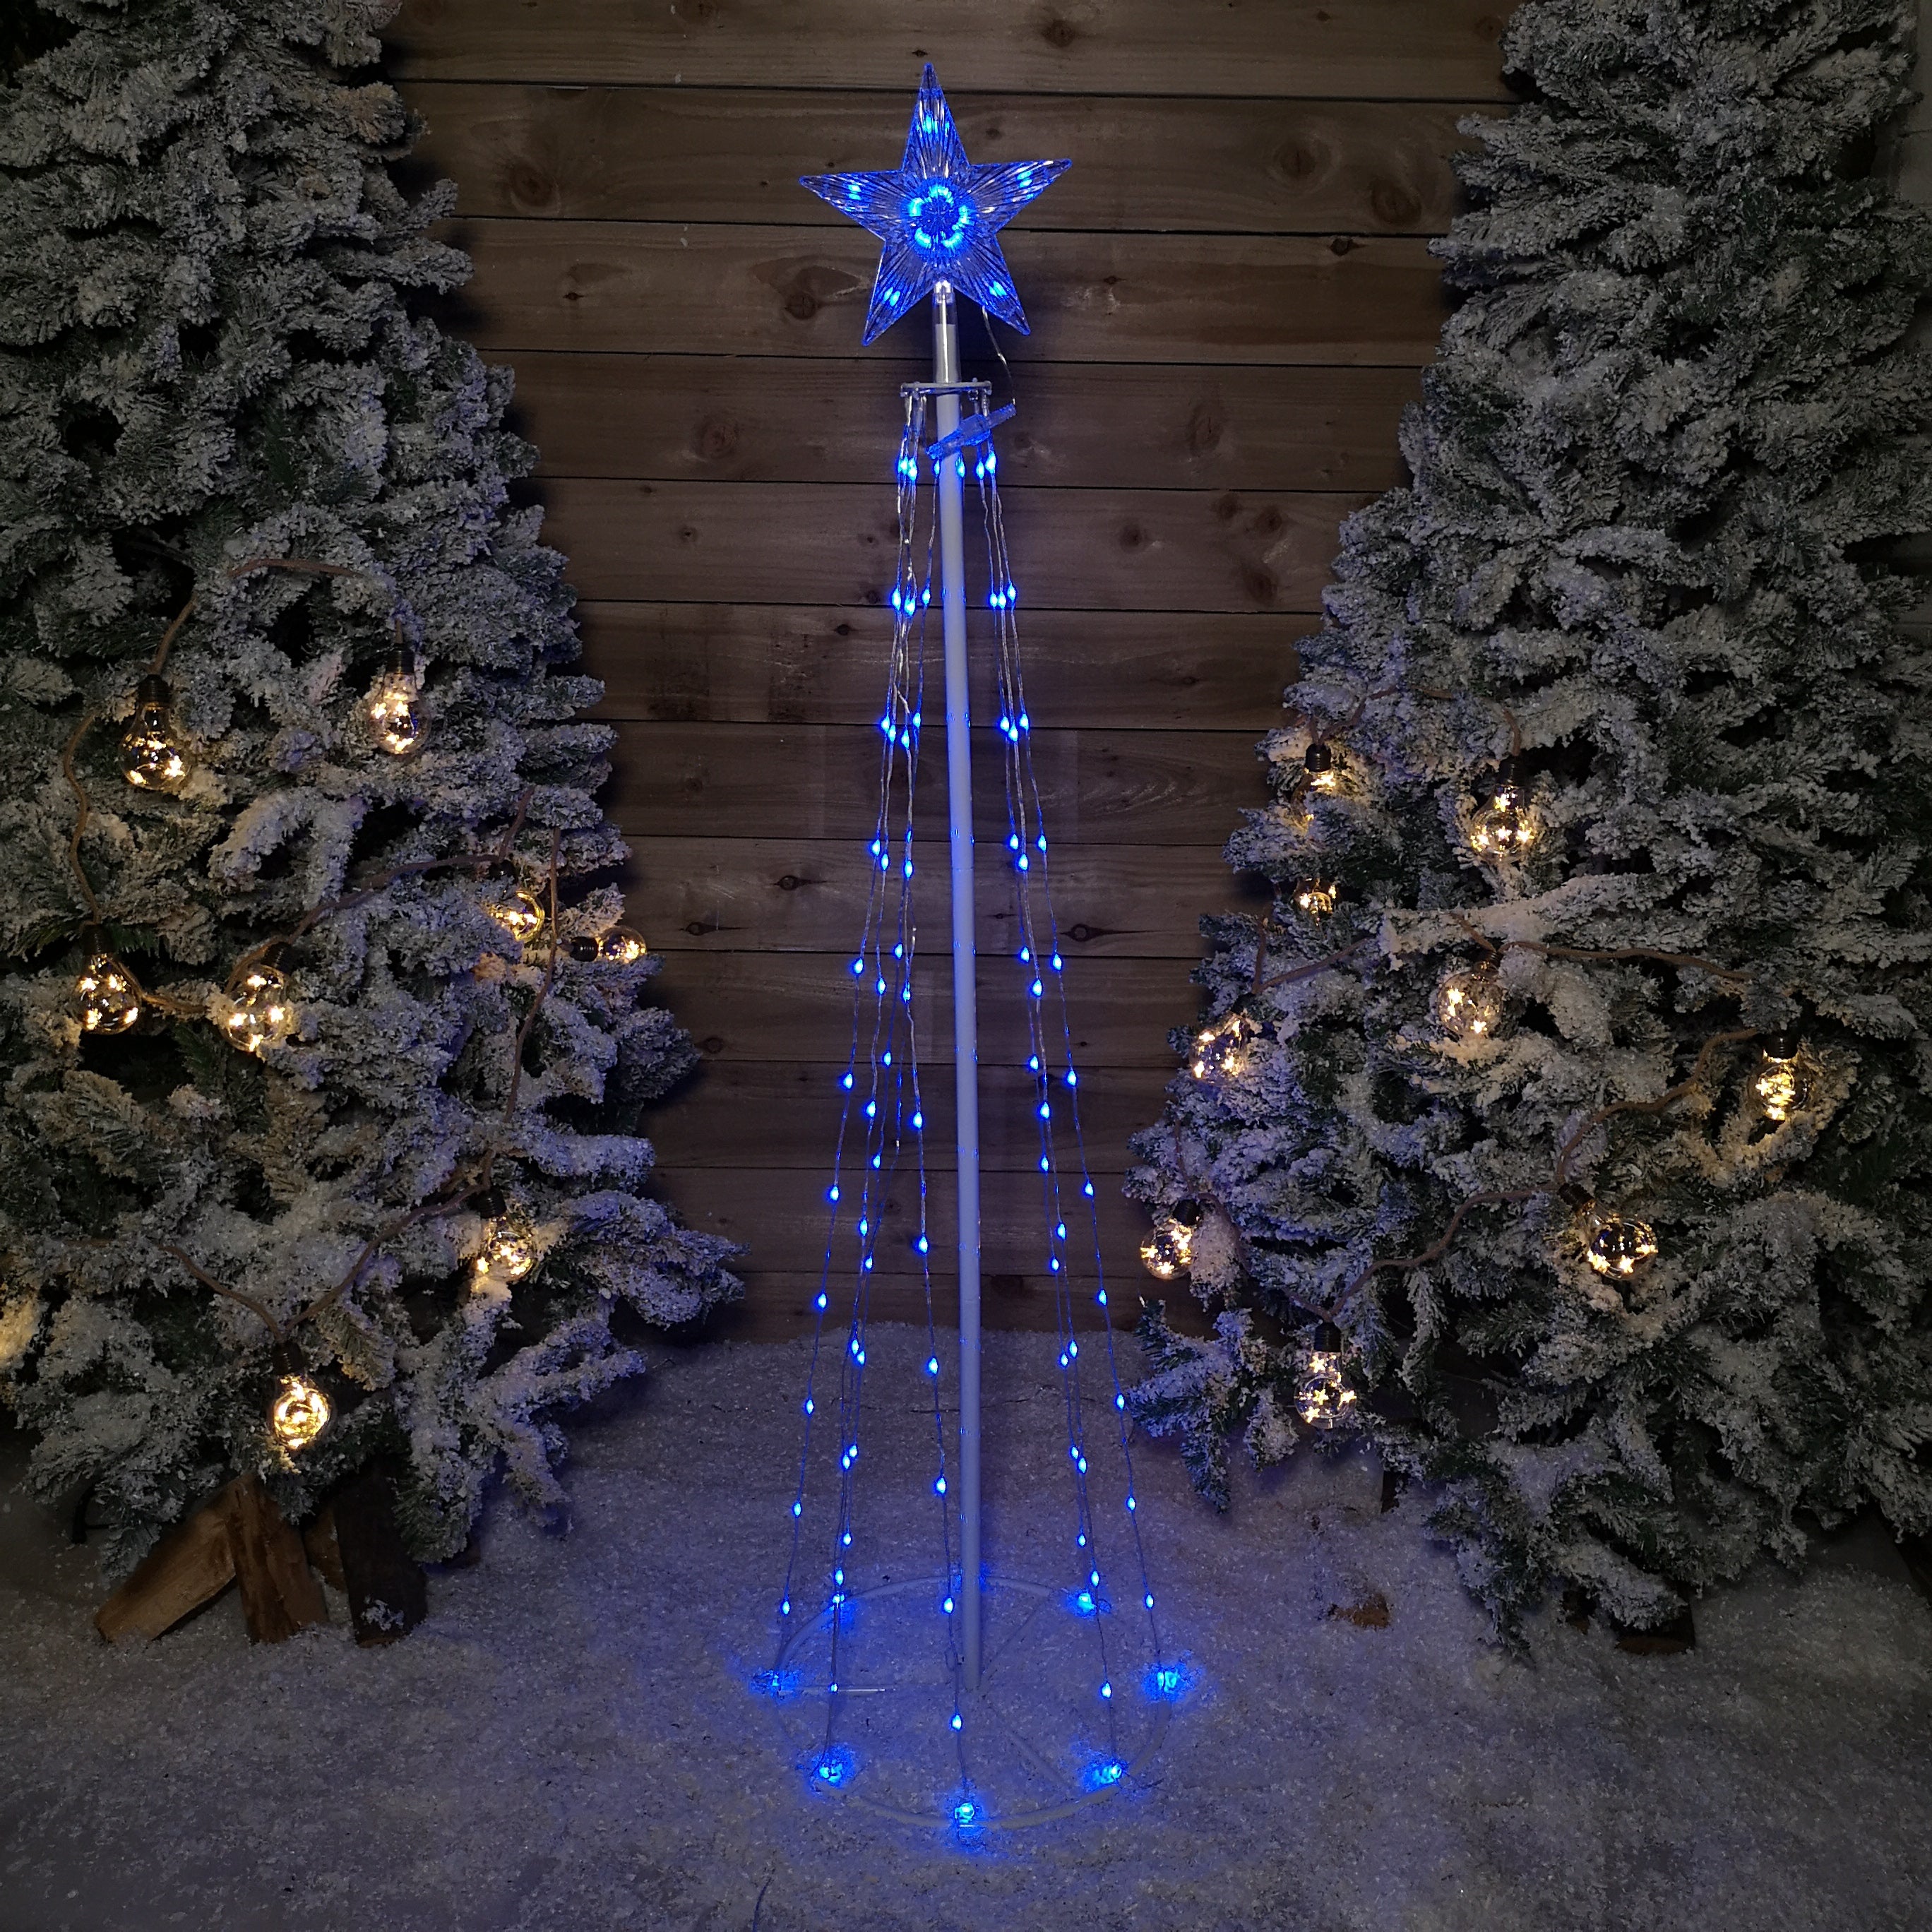 150cm (5ft) White Metal Maypole Tree with 106 Rainbow LED Wire Lights and Remote